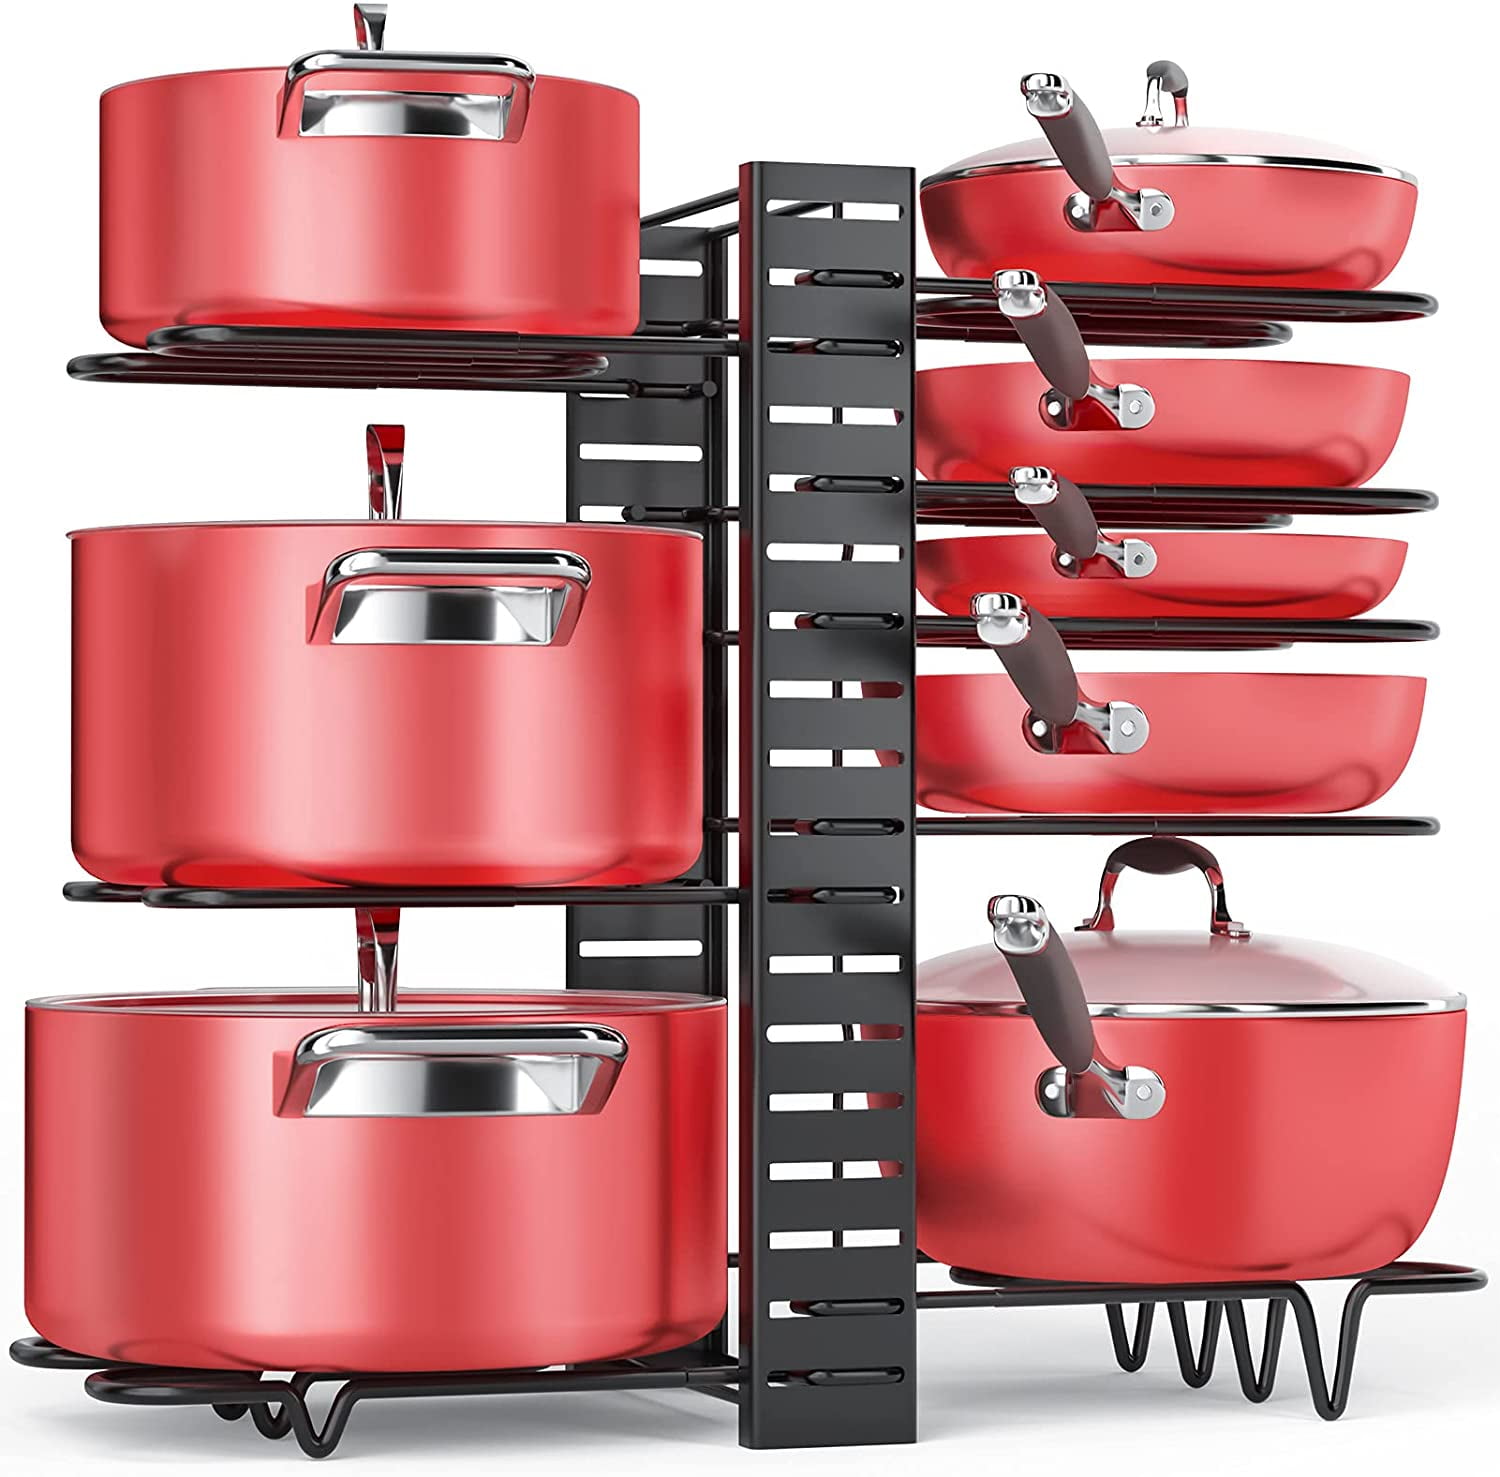 X-cosrack Pot Pan Lid Rack 12 Tier Two-in-One Adjustable Organizer Holder With 6 